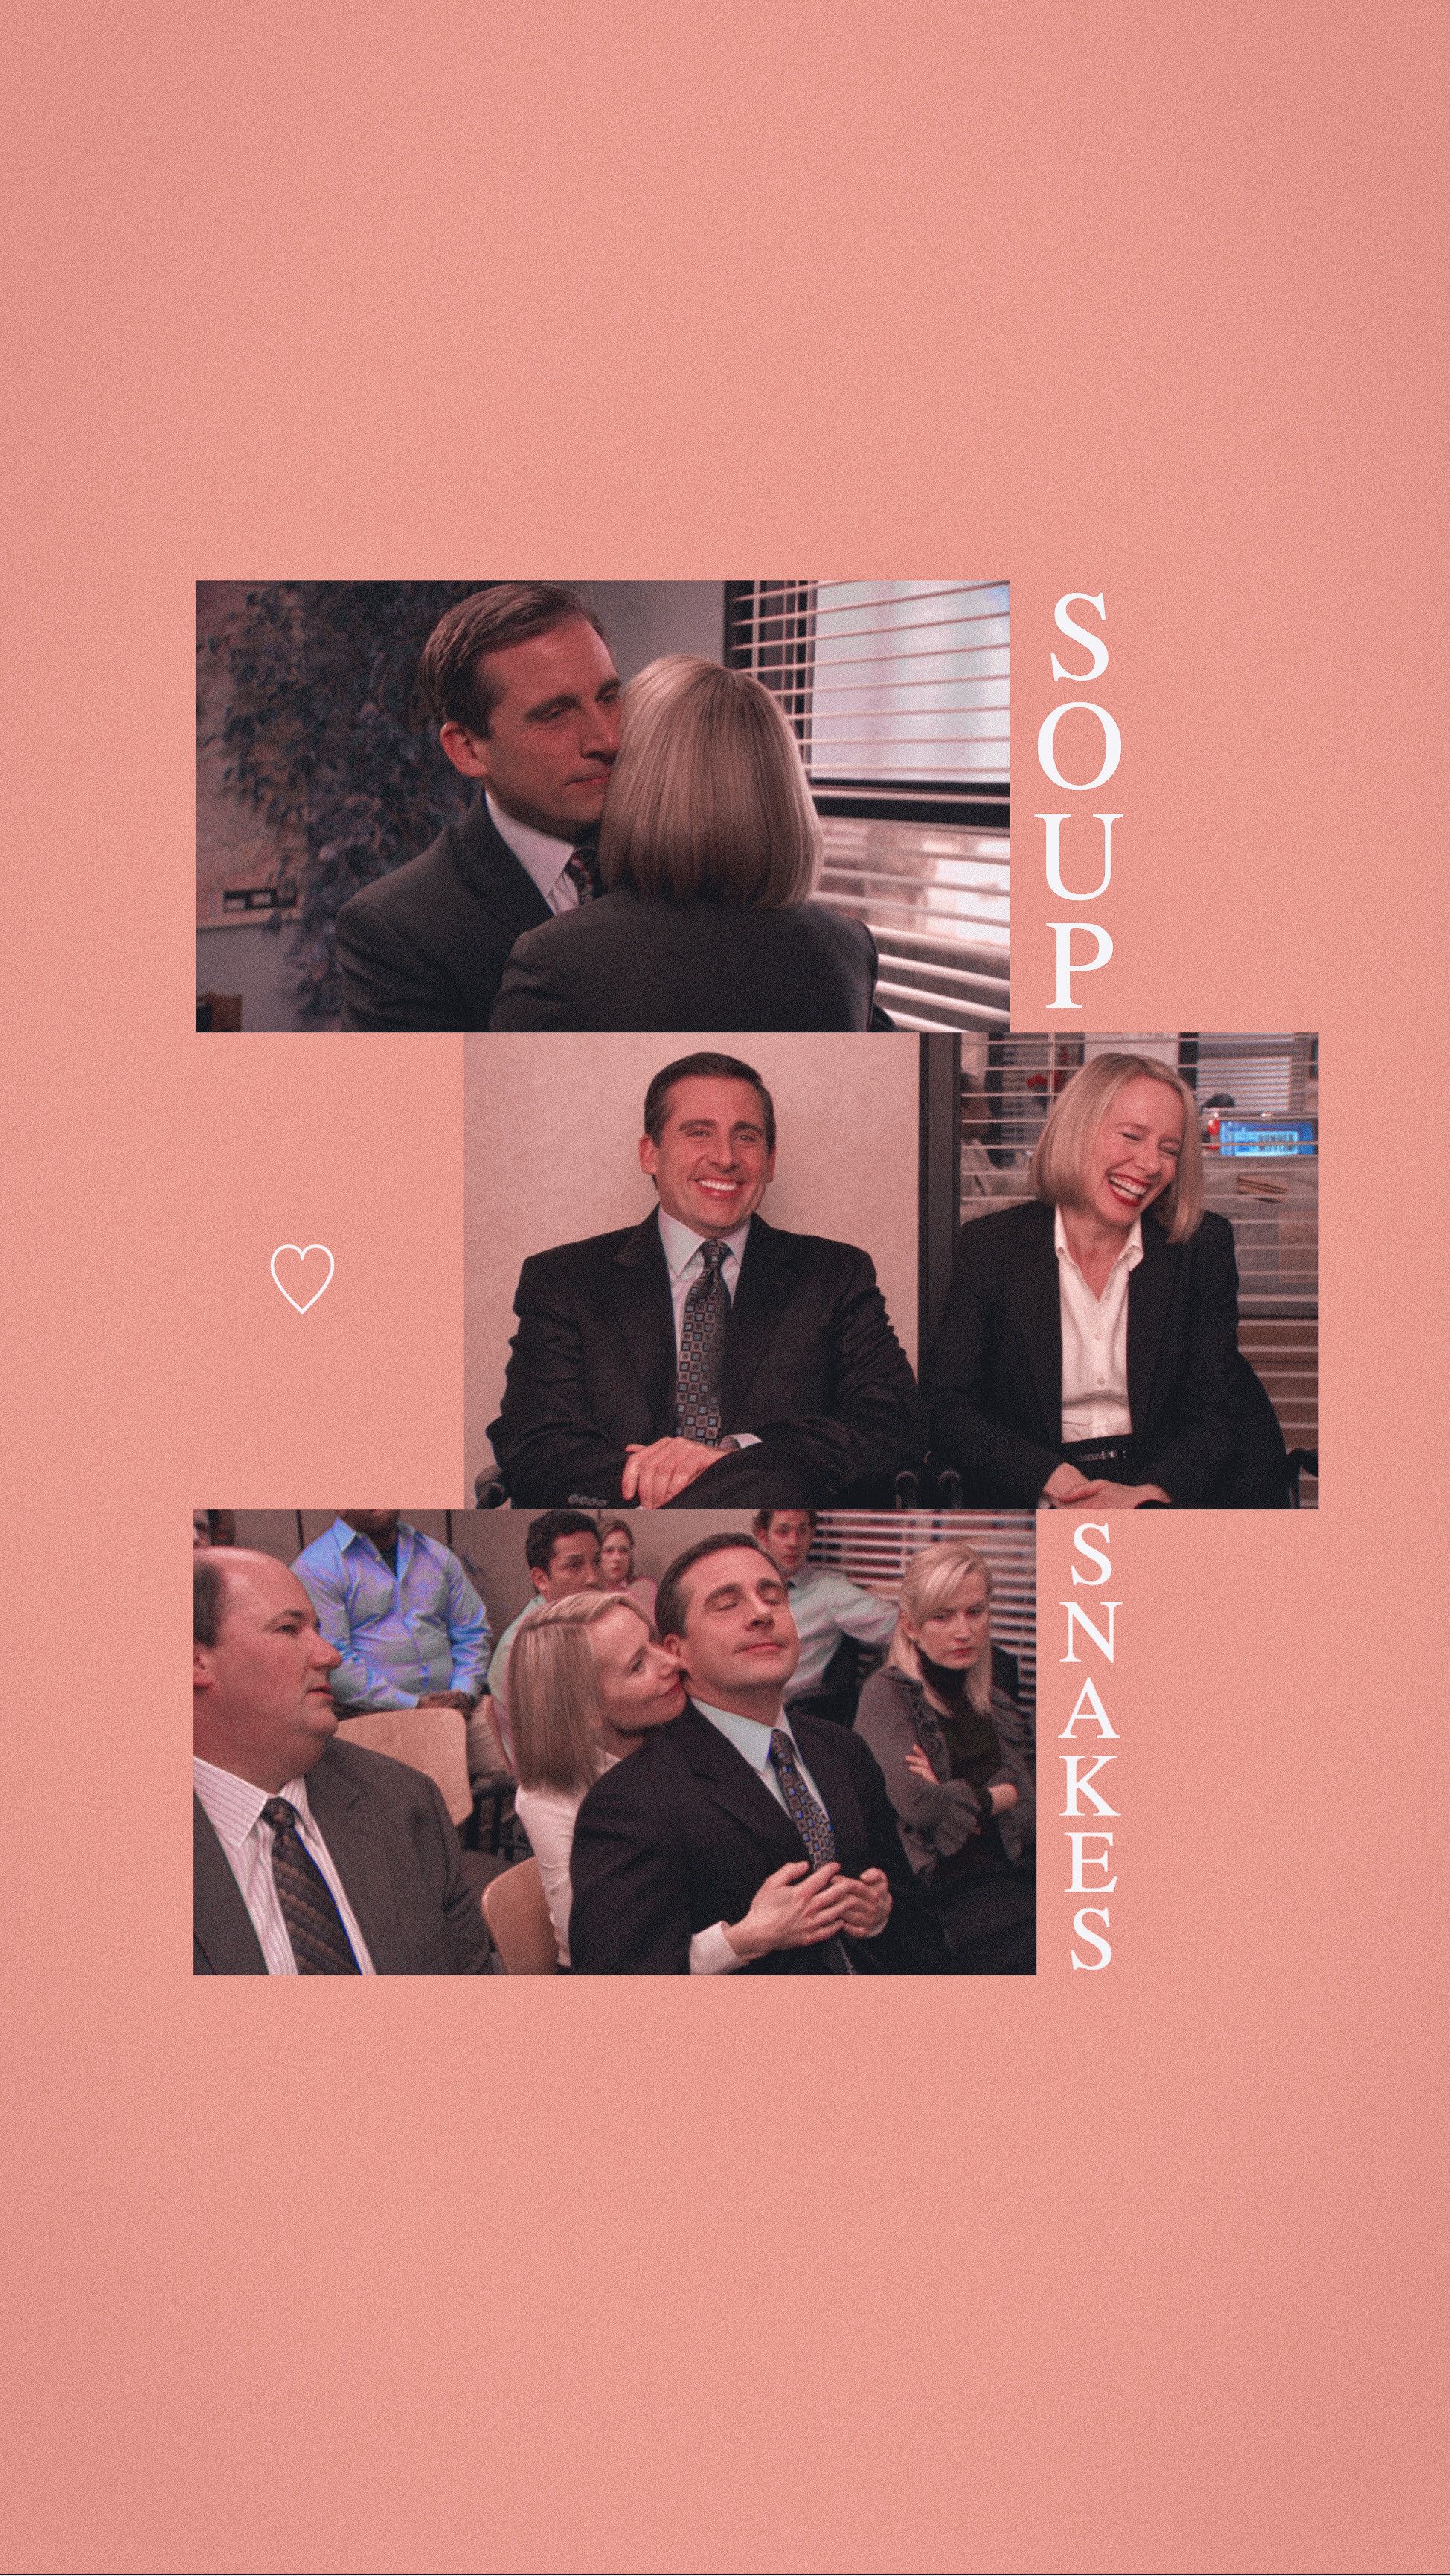 The office wallpaper. The office show, Holly the office, Best of the office